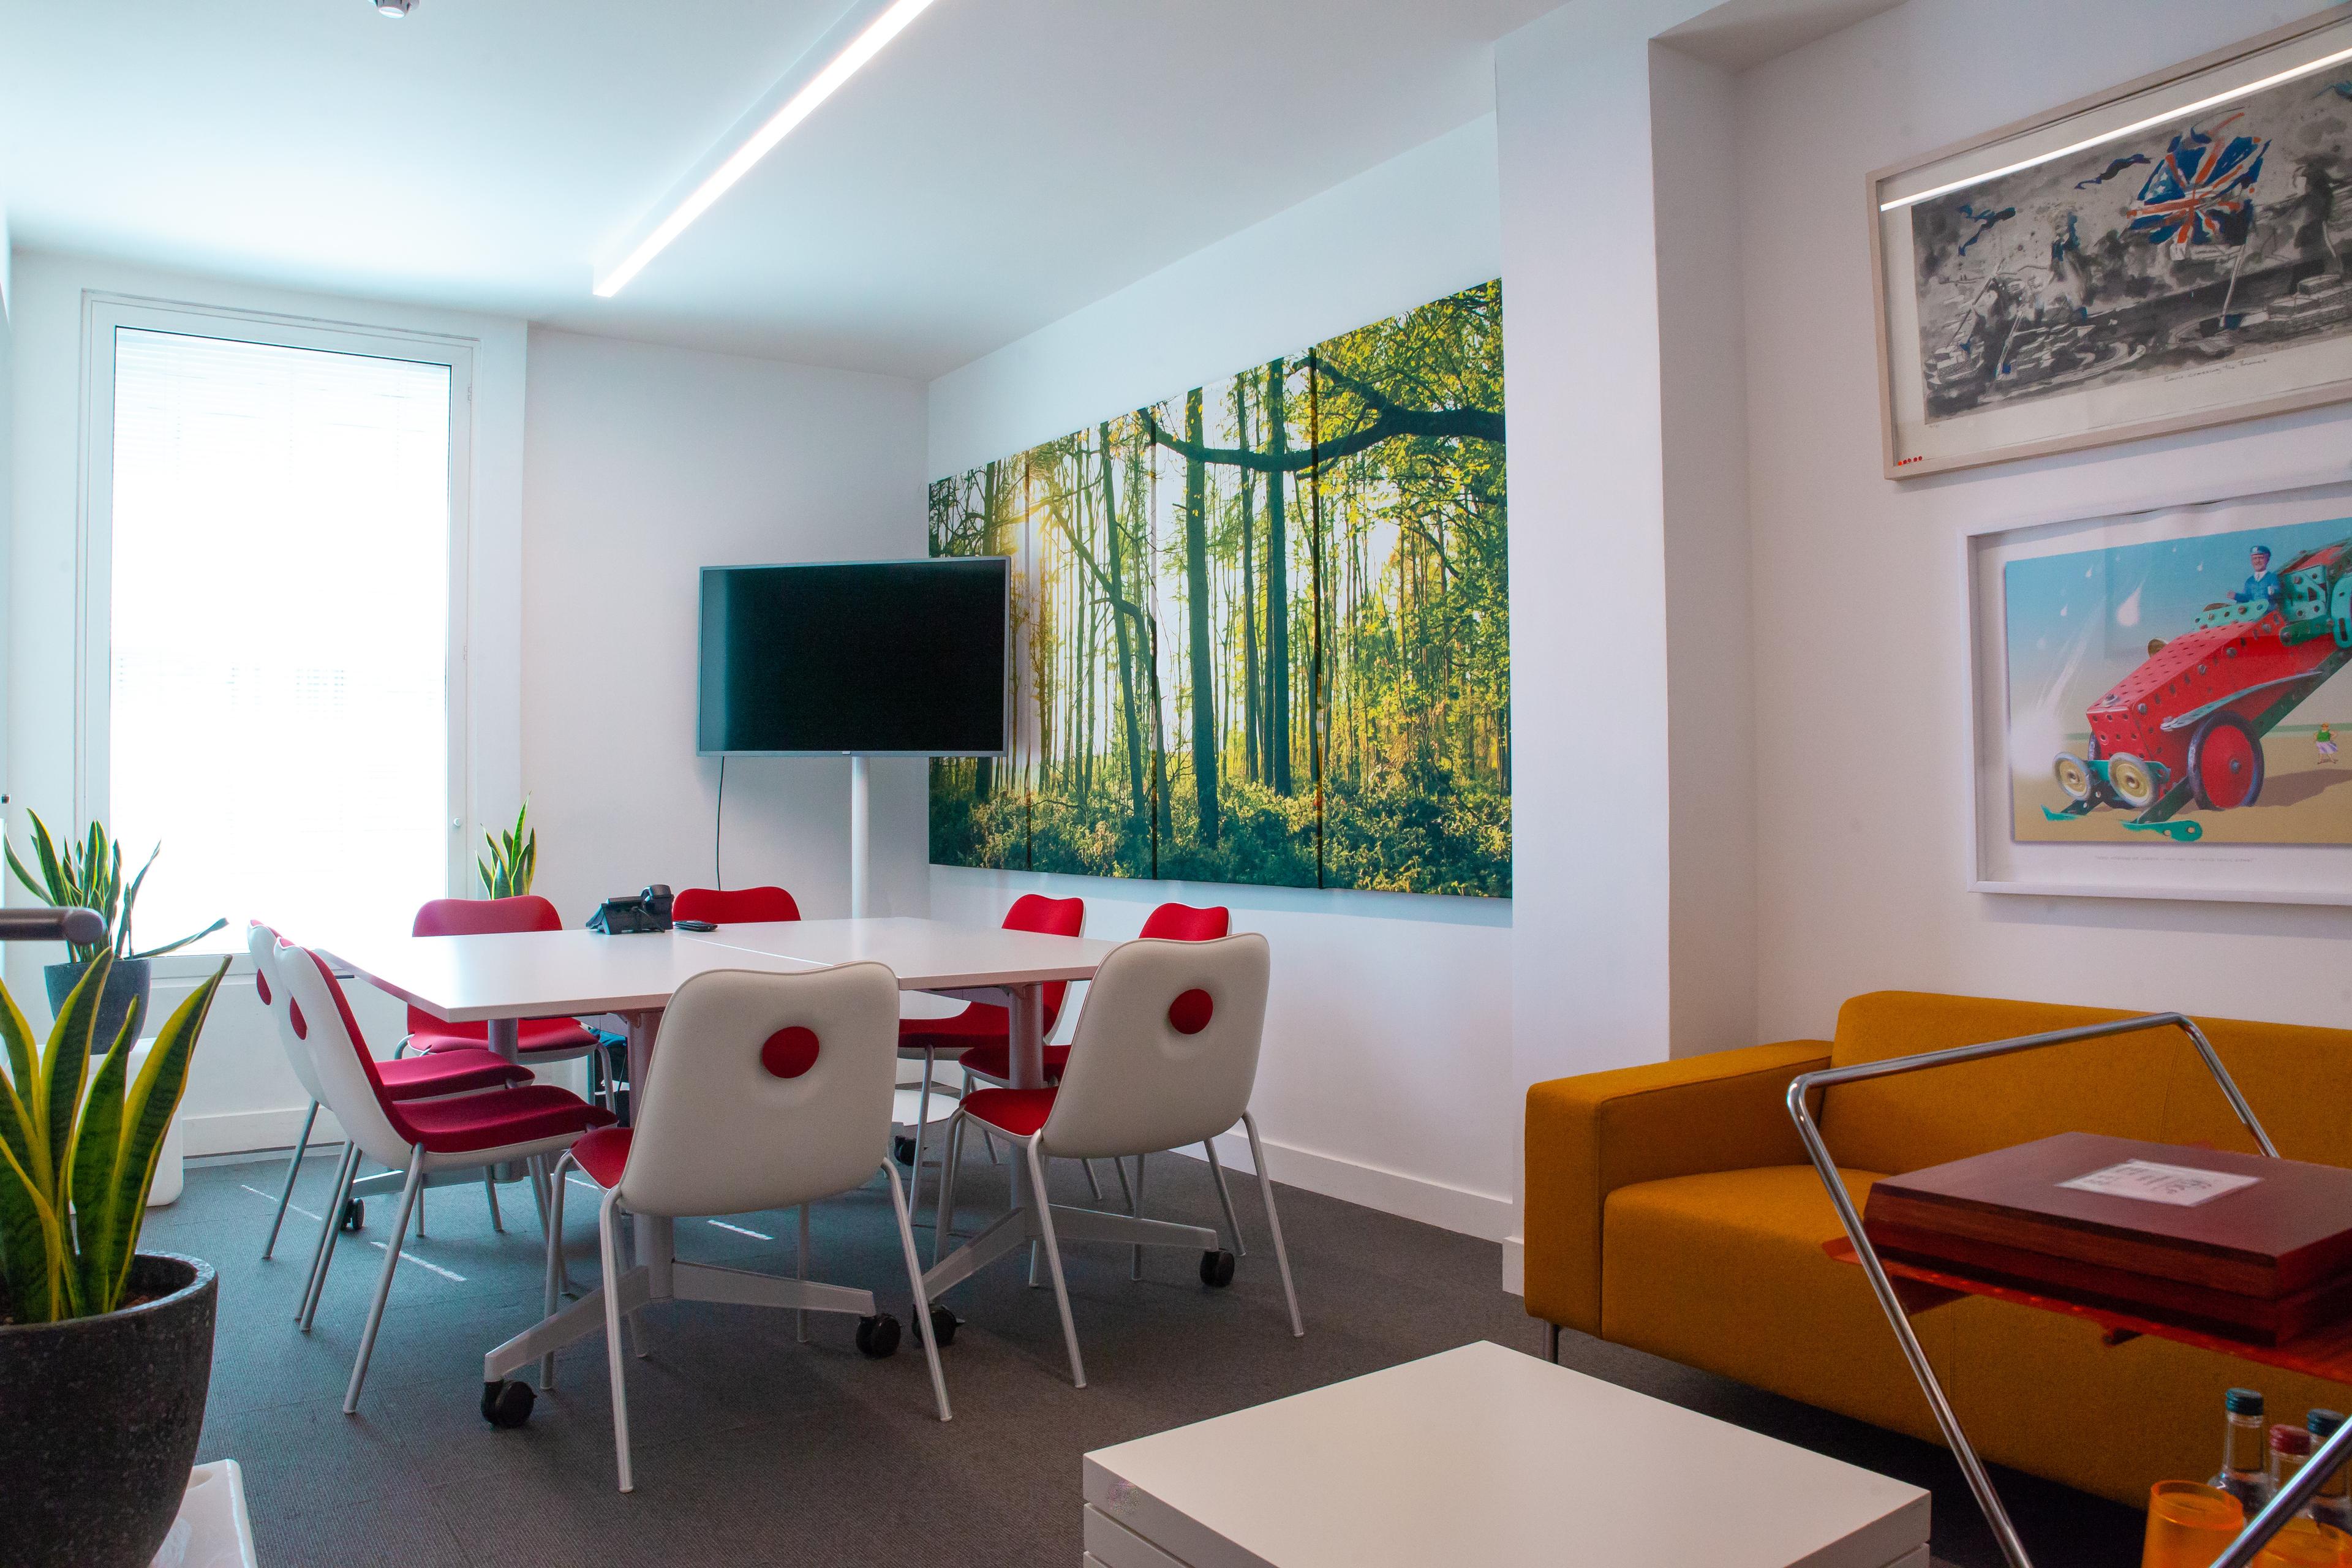 eOffice Fitzrovia, Conference Room For Up To 24 People photo #4